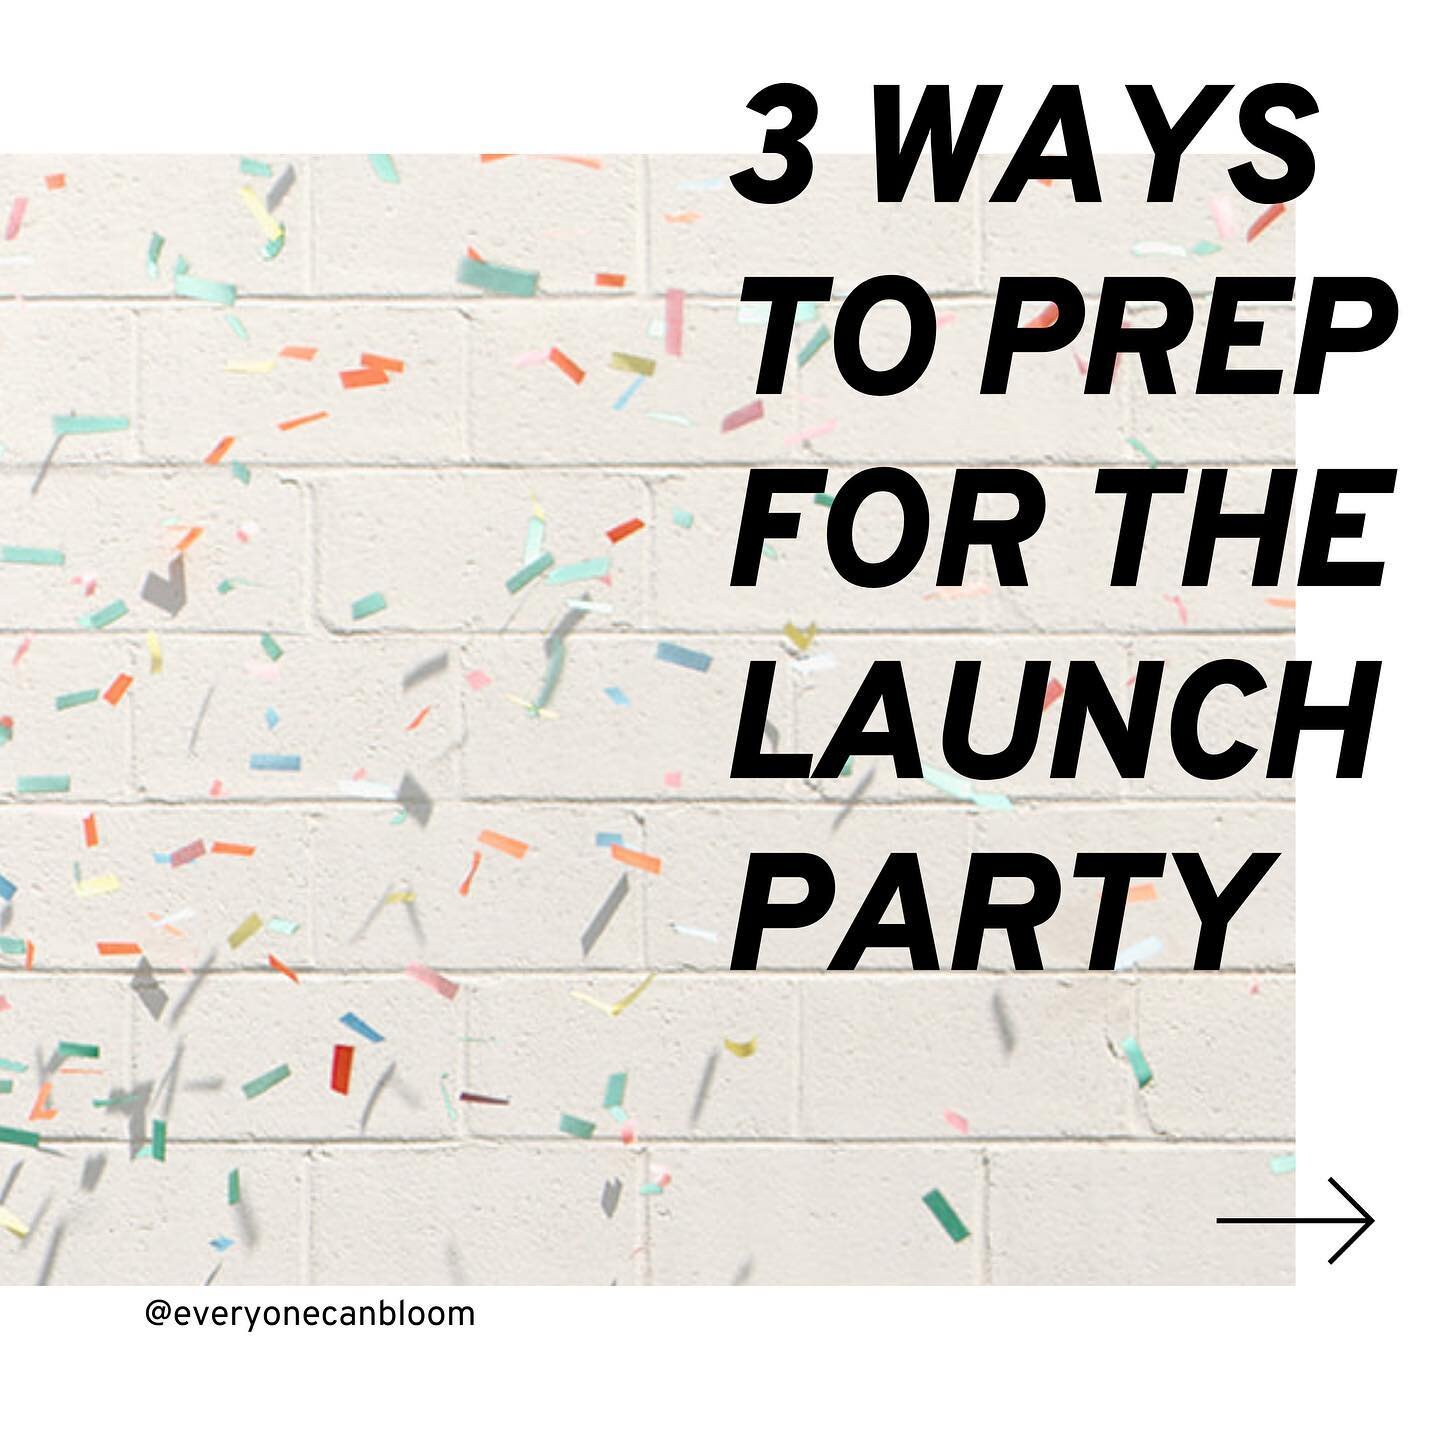 How can you get the most out of the virtual launch experience on September 18? Swipe left for 3 ways you can prepare for the party 🎉🎊🥳

Tune in via Instagram Live on Saturday, September 18 at 6:00 PM.

Use the link in Bloom&rsquo;s bio to access t